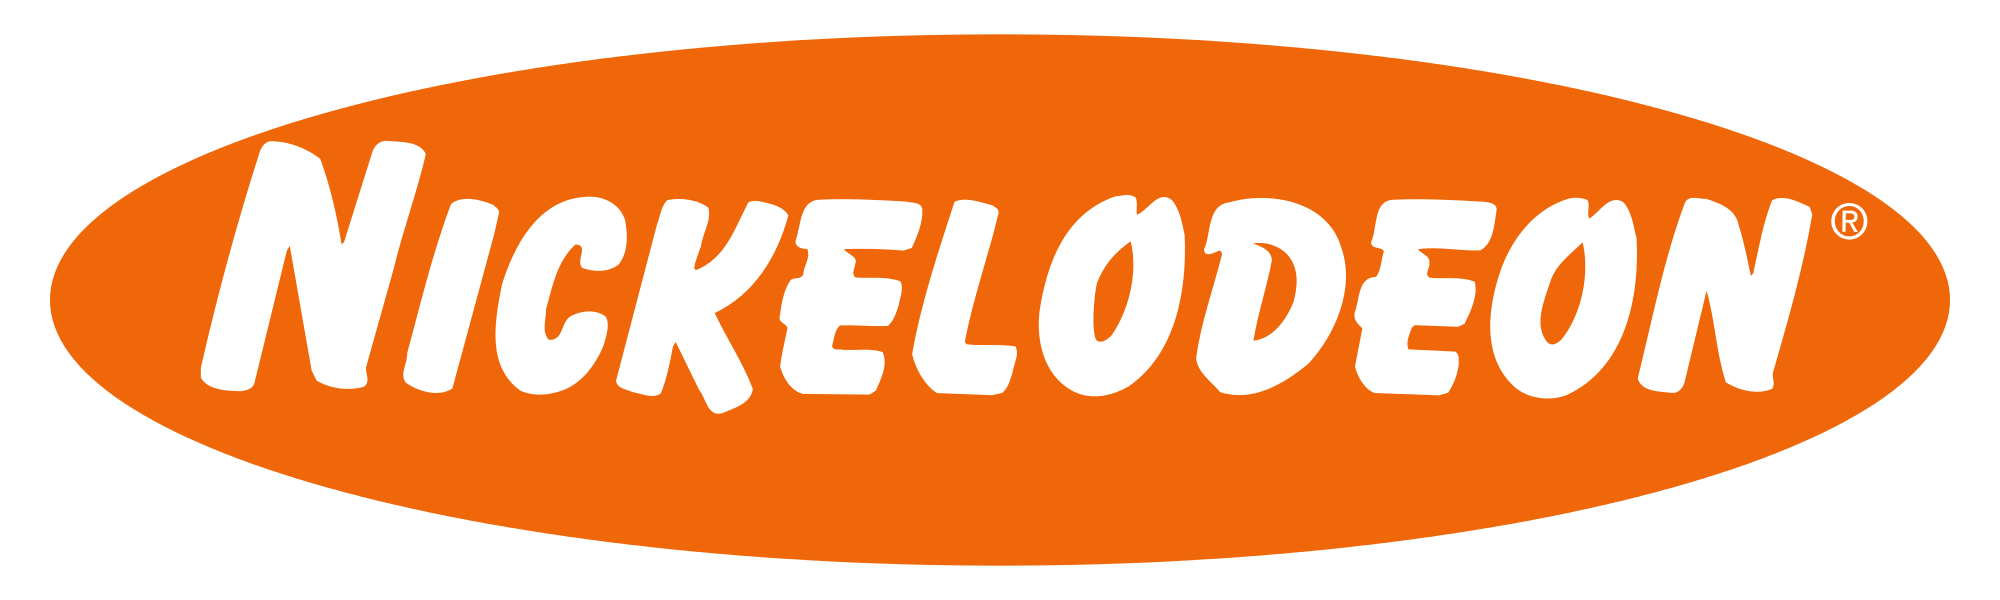 Nickolodeon Logo - Meaning Nickelodeon logo and symbol | history and evolution